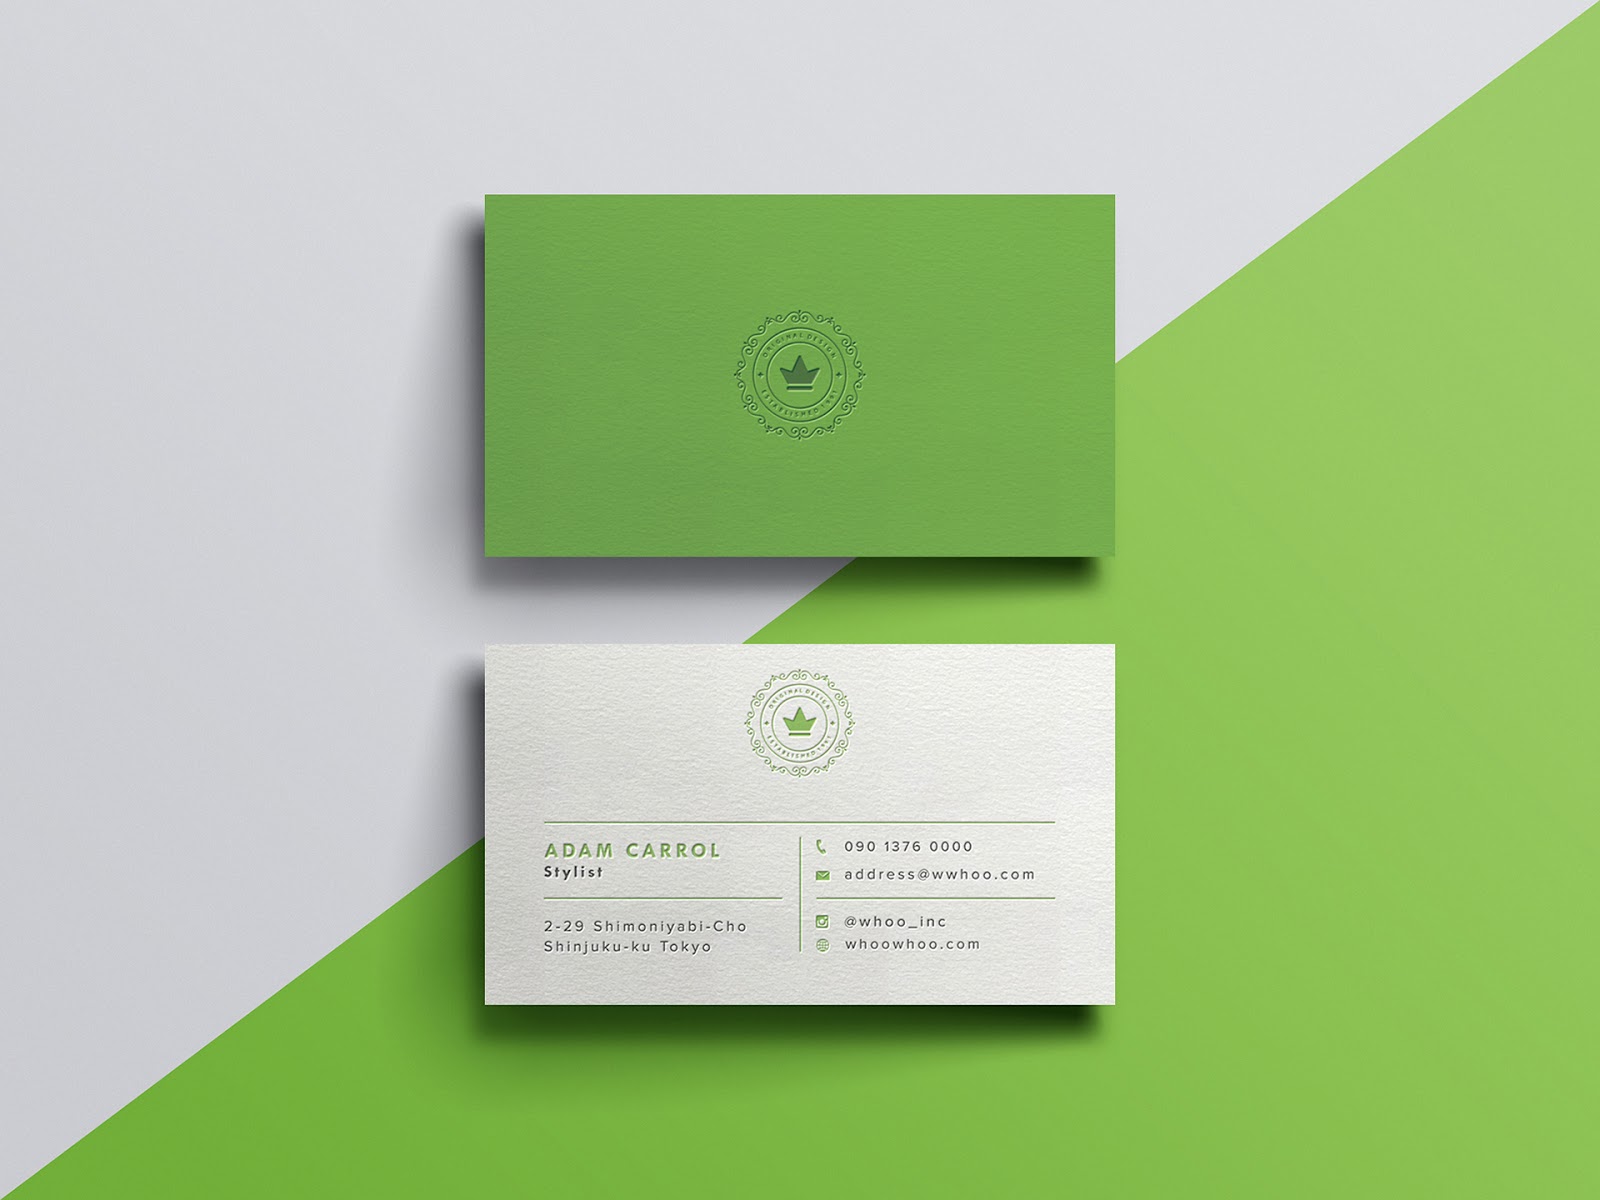 Download Business Card Mockup PSD file | Free Download Vol.2 - Graphic School